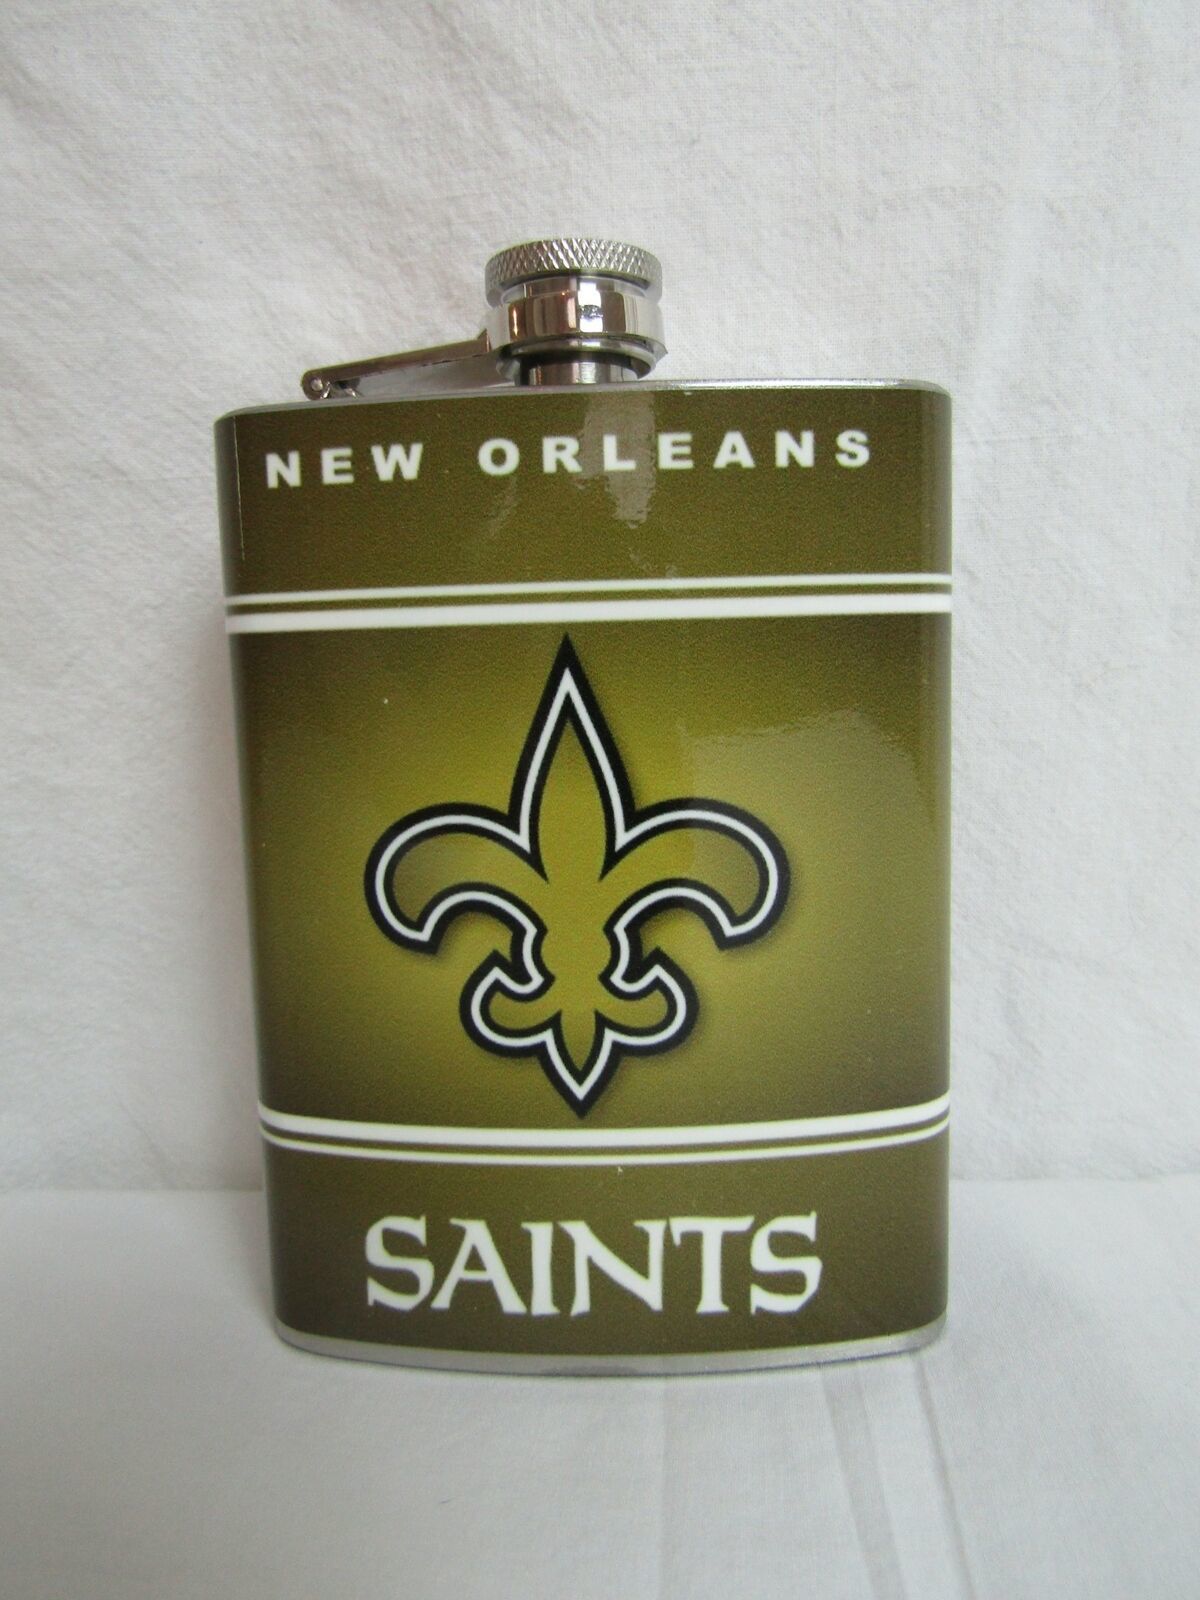 New Orleans Saints Stainless Steel 8oz. Hip Flask FB11NOS - $9.95